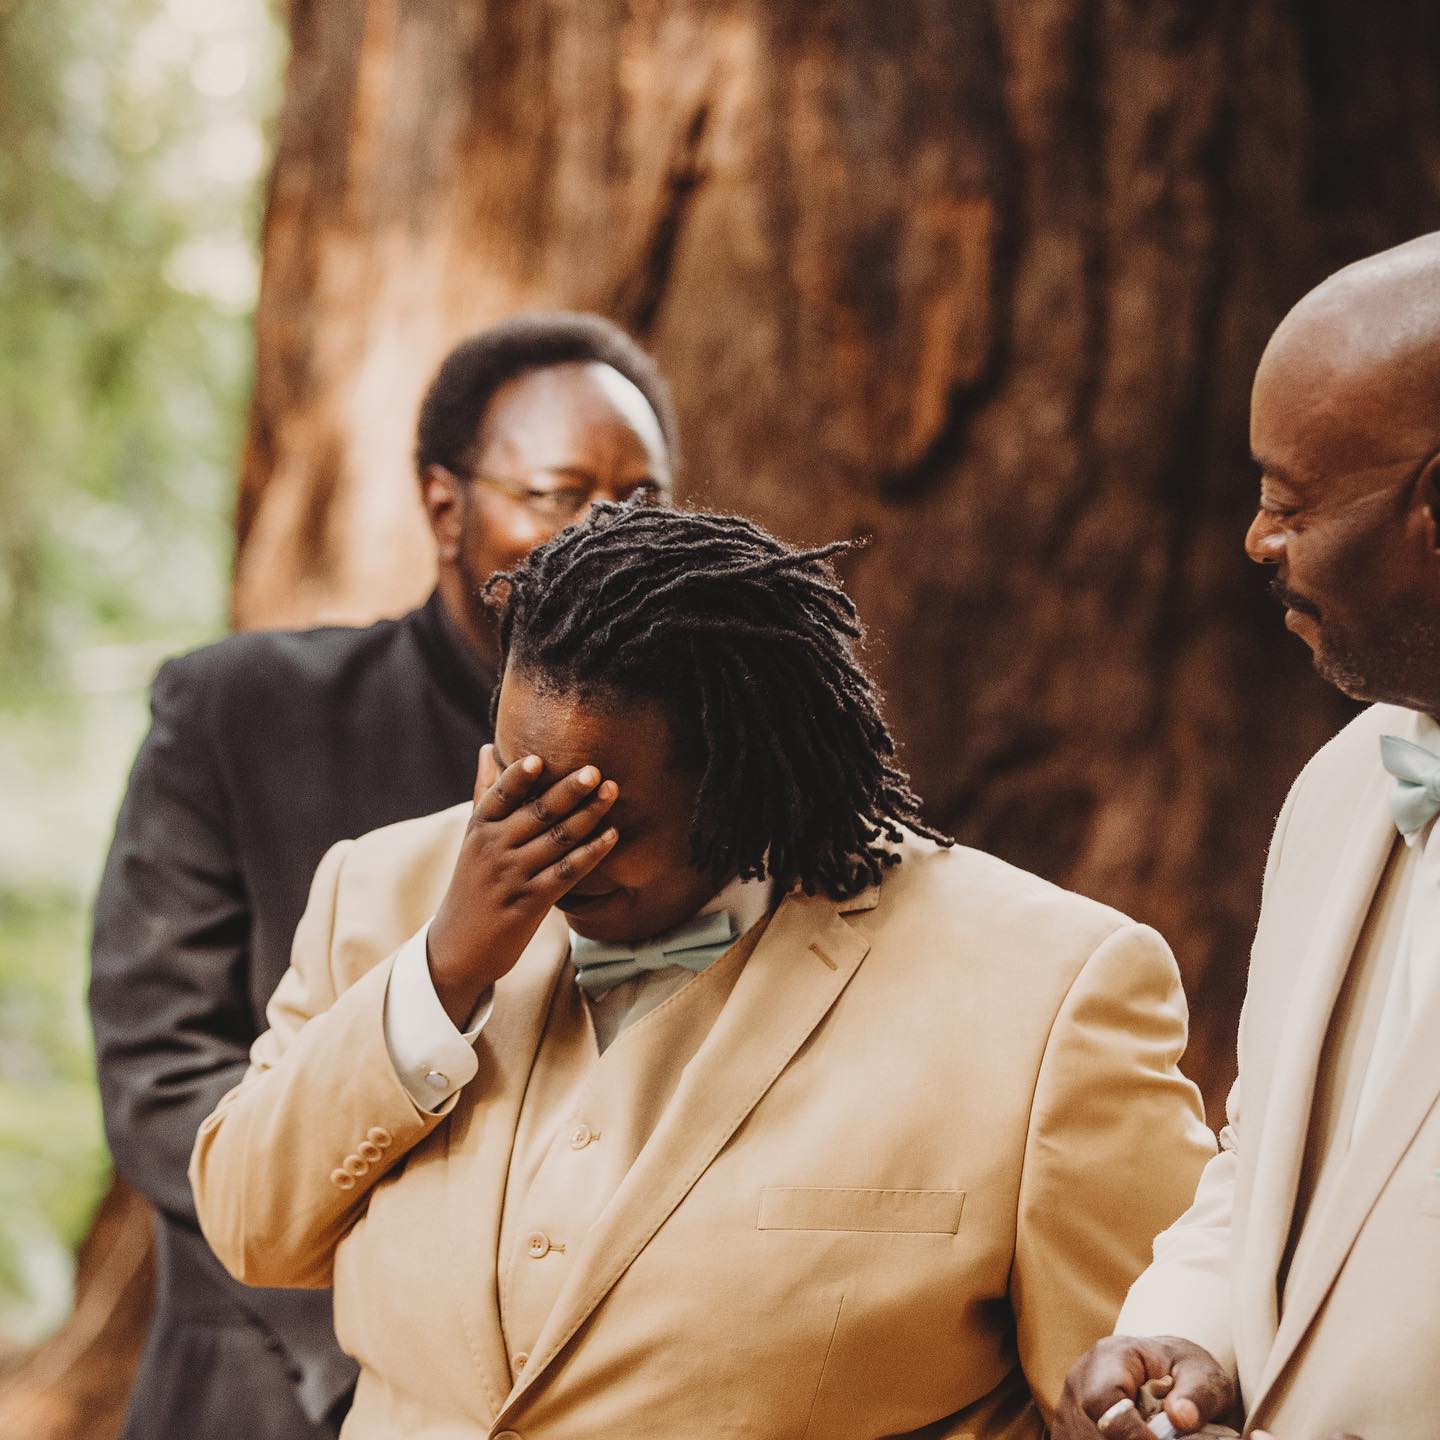 A person getting emotional during a wedding ceremony